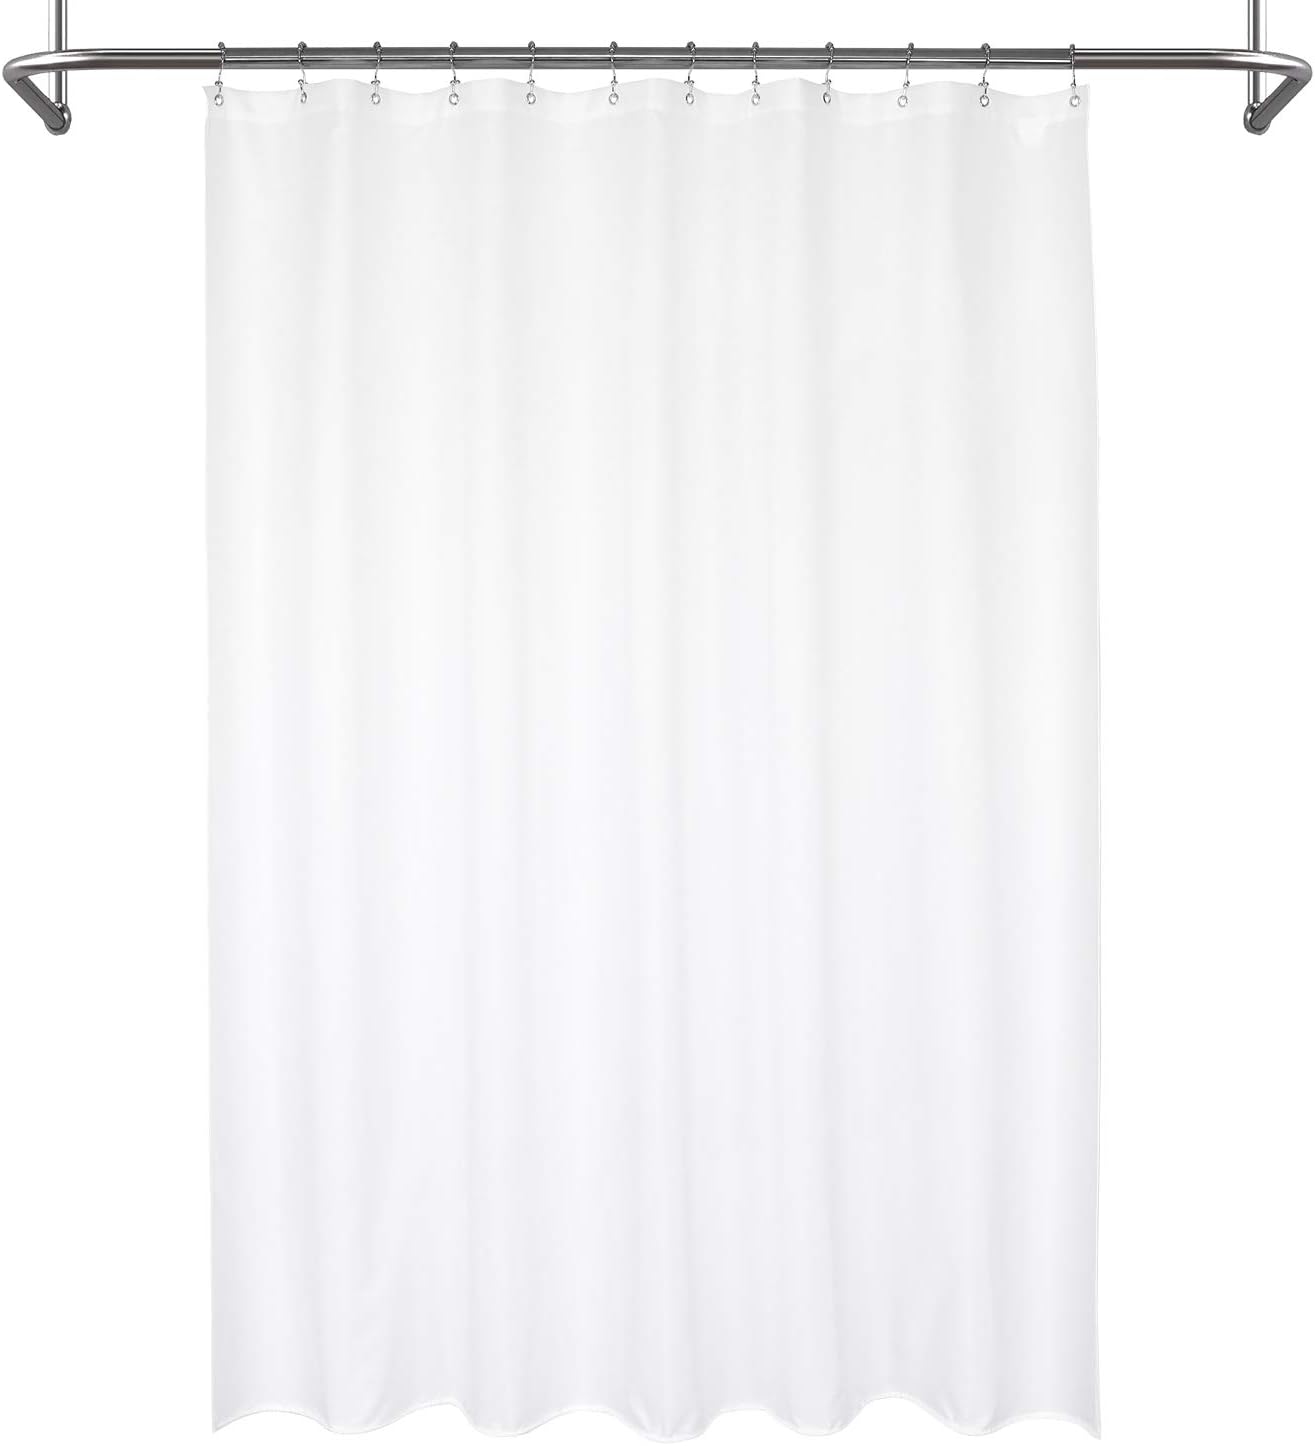 Machine Washable Cloth Shower Curtain, Are Cloth Shower Curtains Waterproof